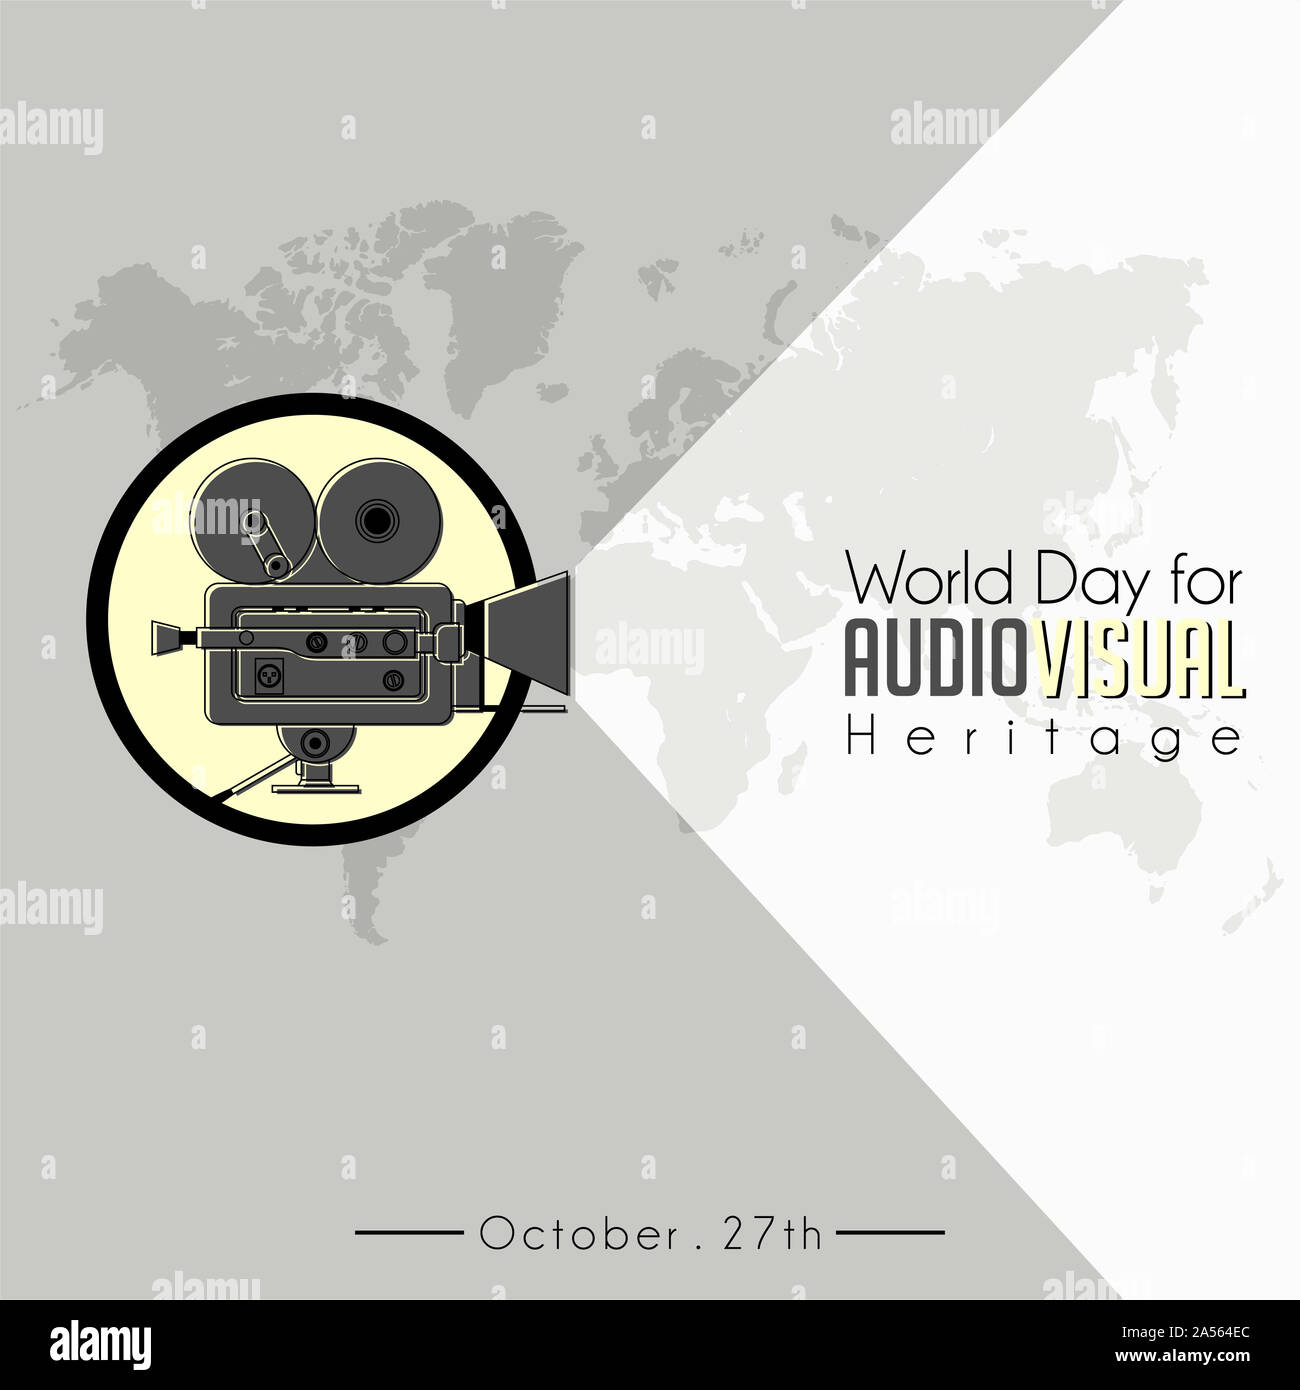 World Day For Audio Visual heritage with Classic Vintage Camcorder (old movie Camera) icon vector and world map background Stock Photo